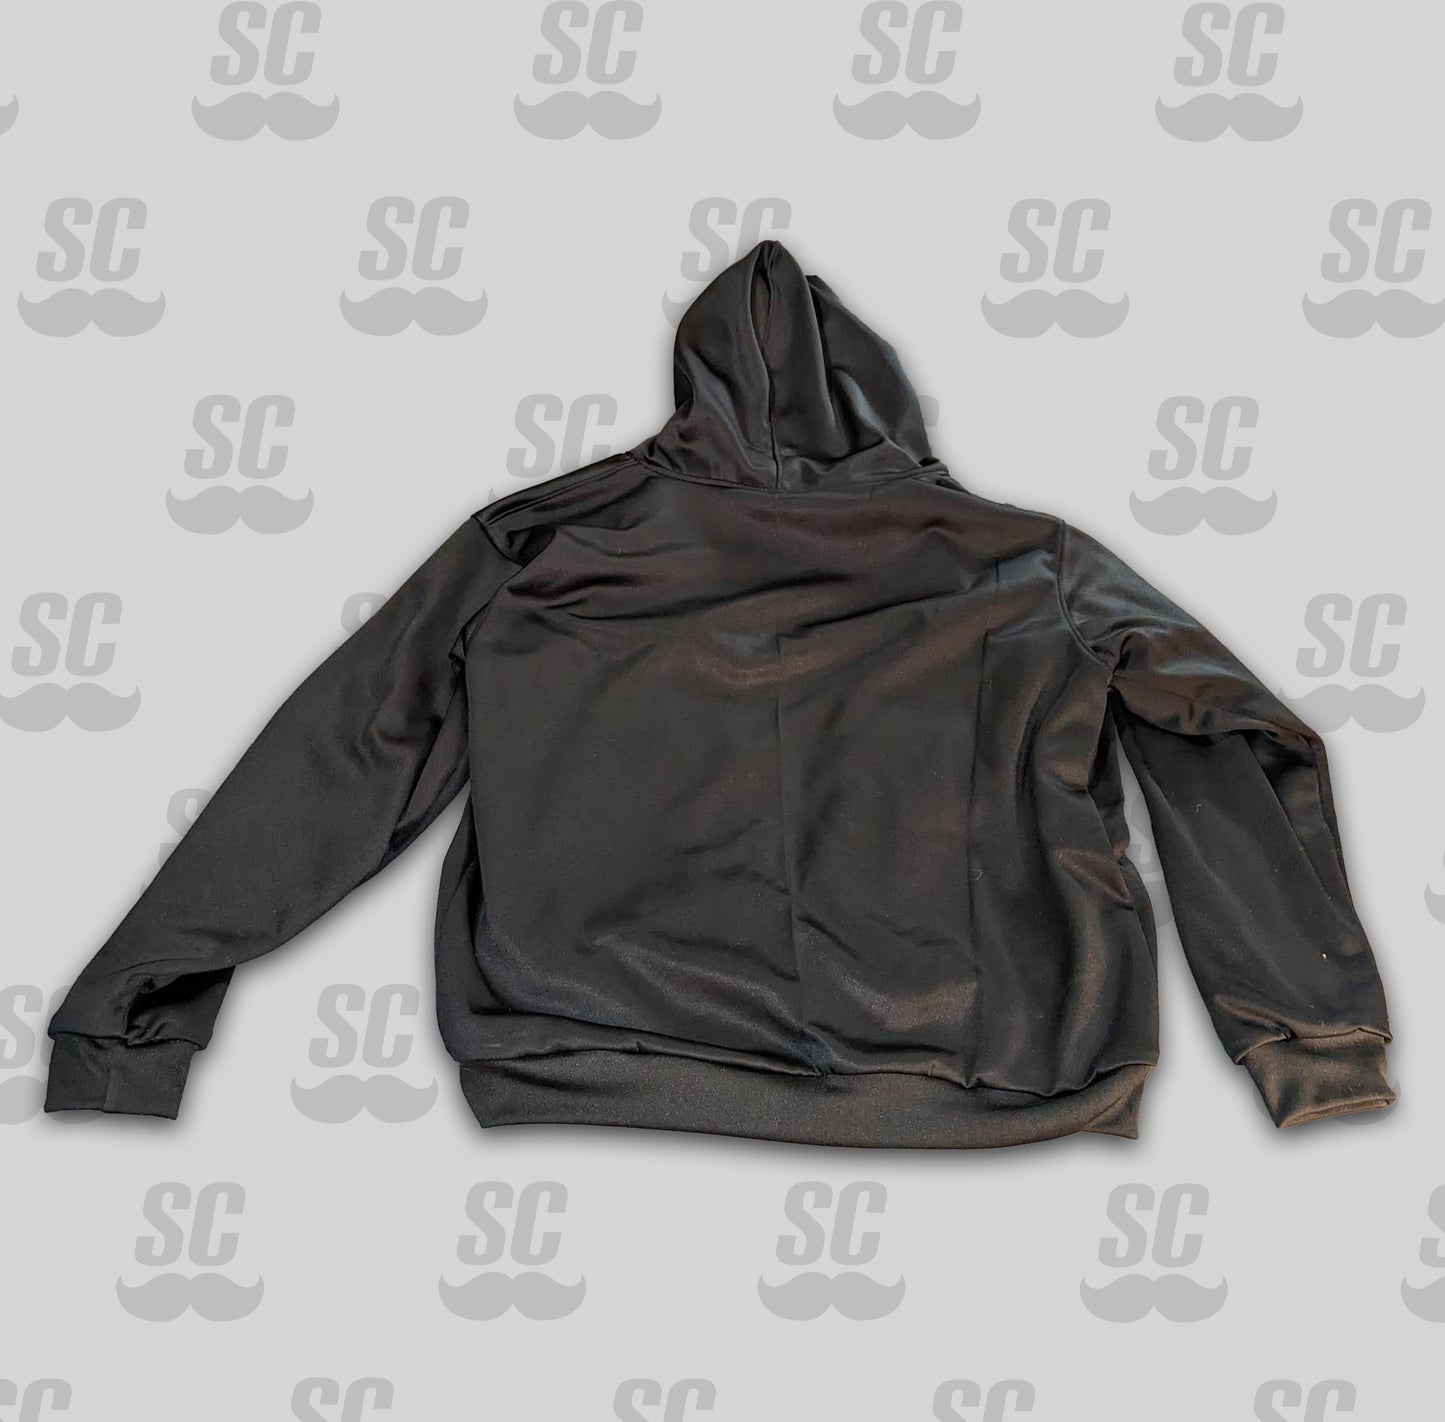 SC reversible black and white trippy hoodie